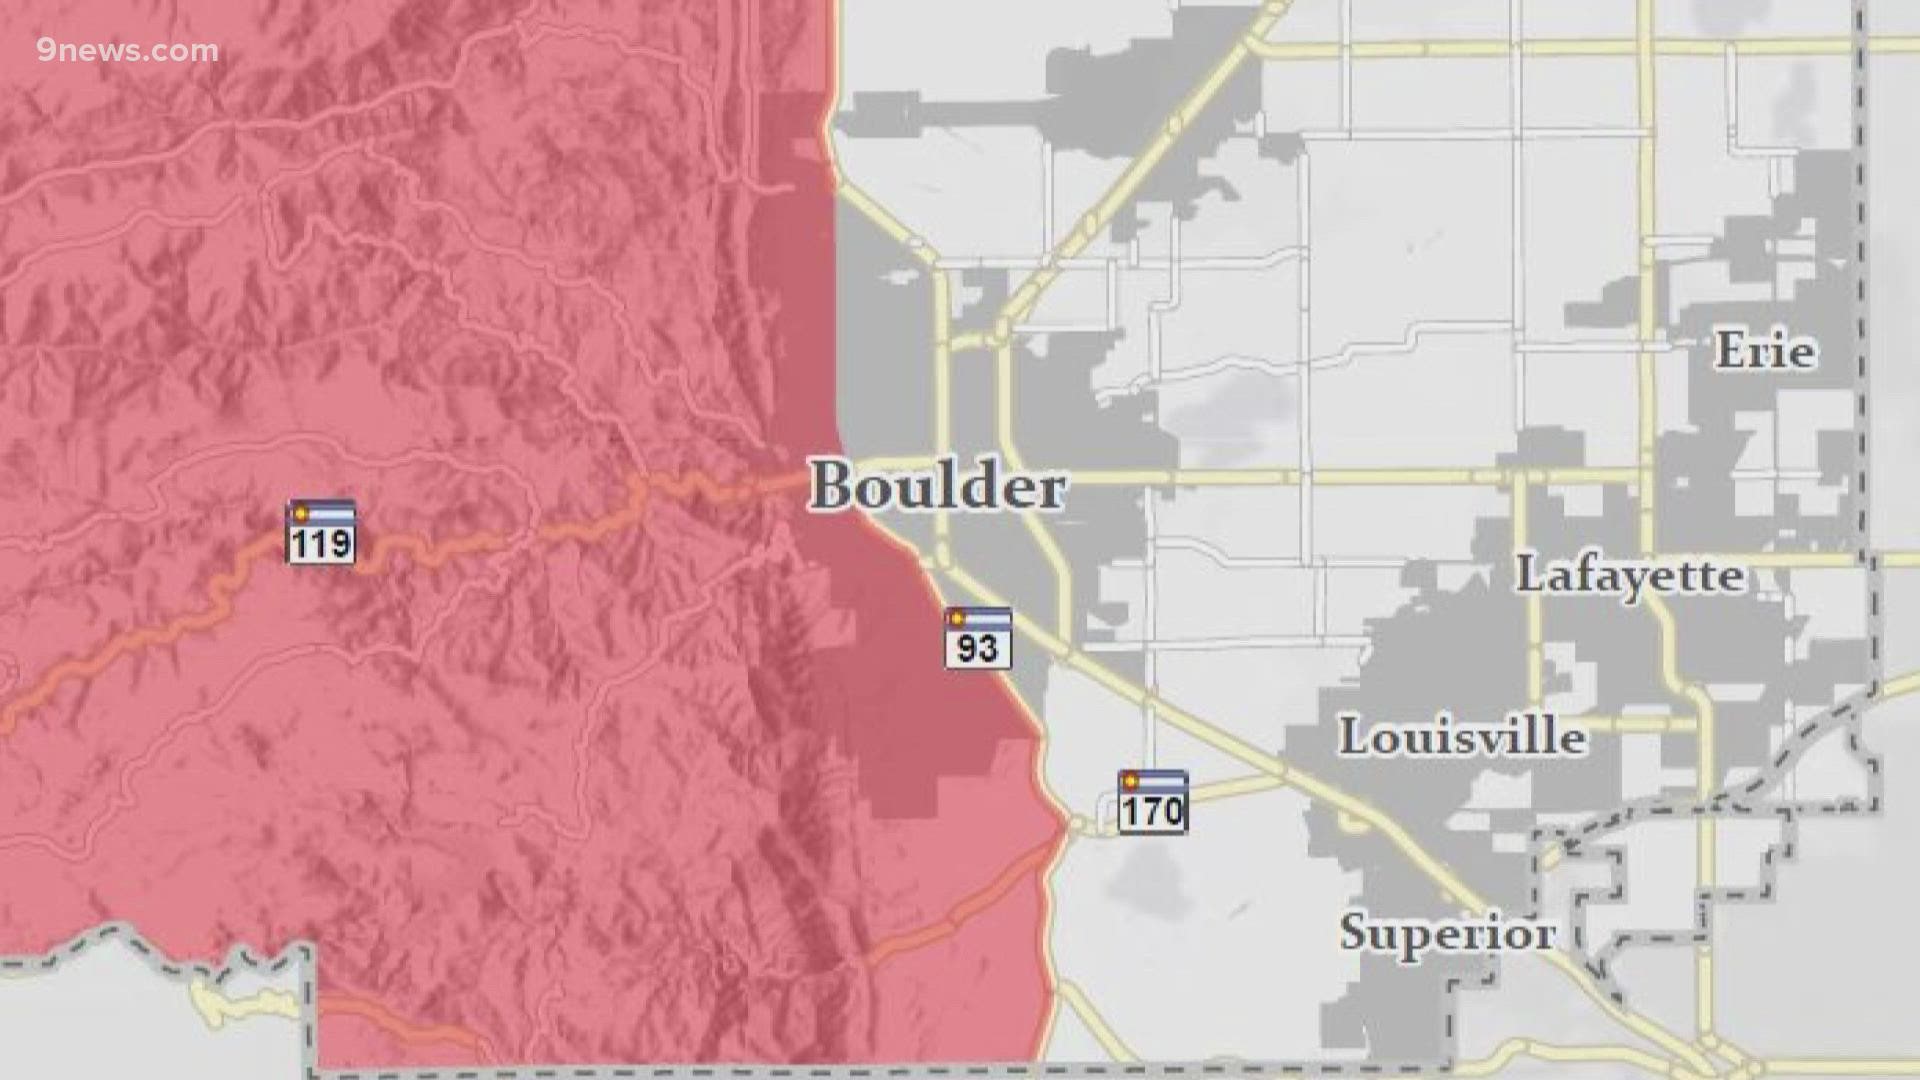 When the Marshall Fire started, the western part of Boulder County, west of Highway 93, was under a fire ban. East of the highway was not.